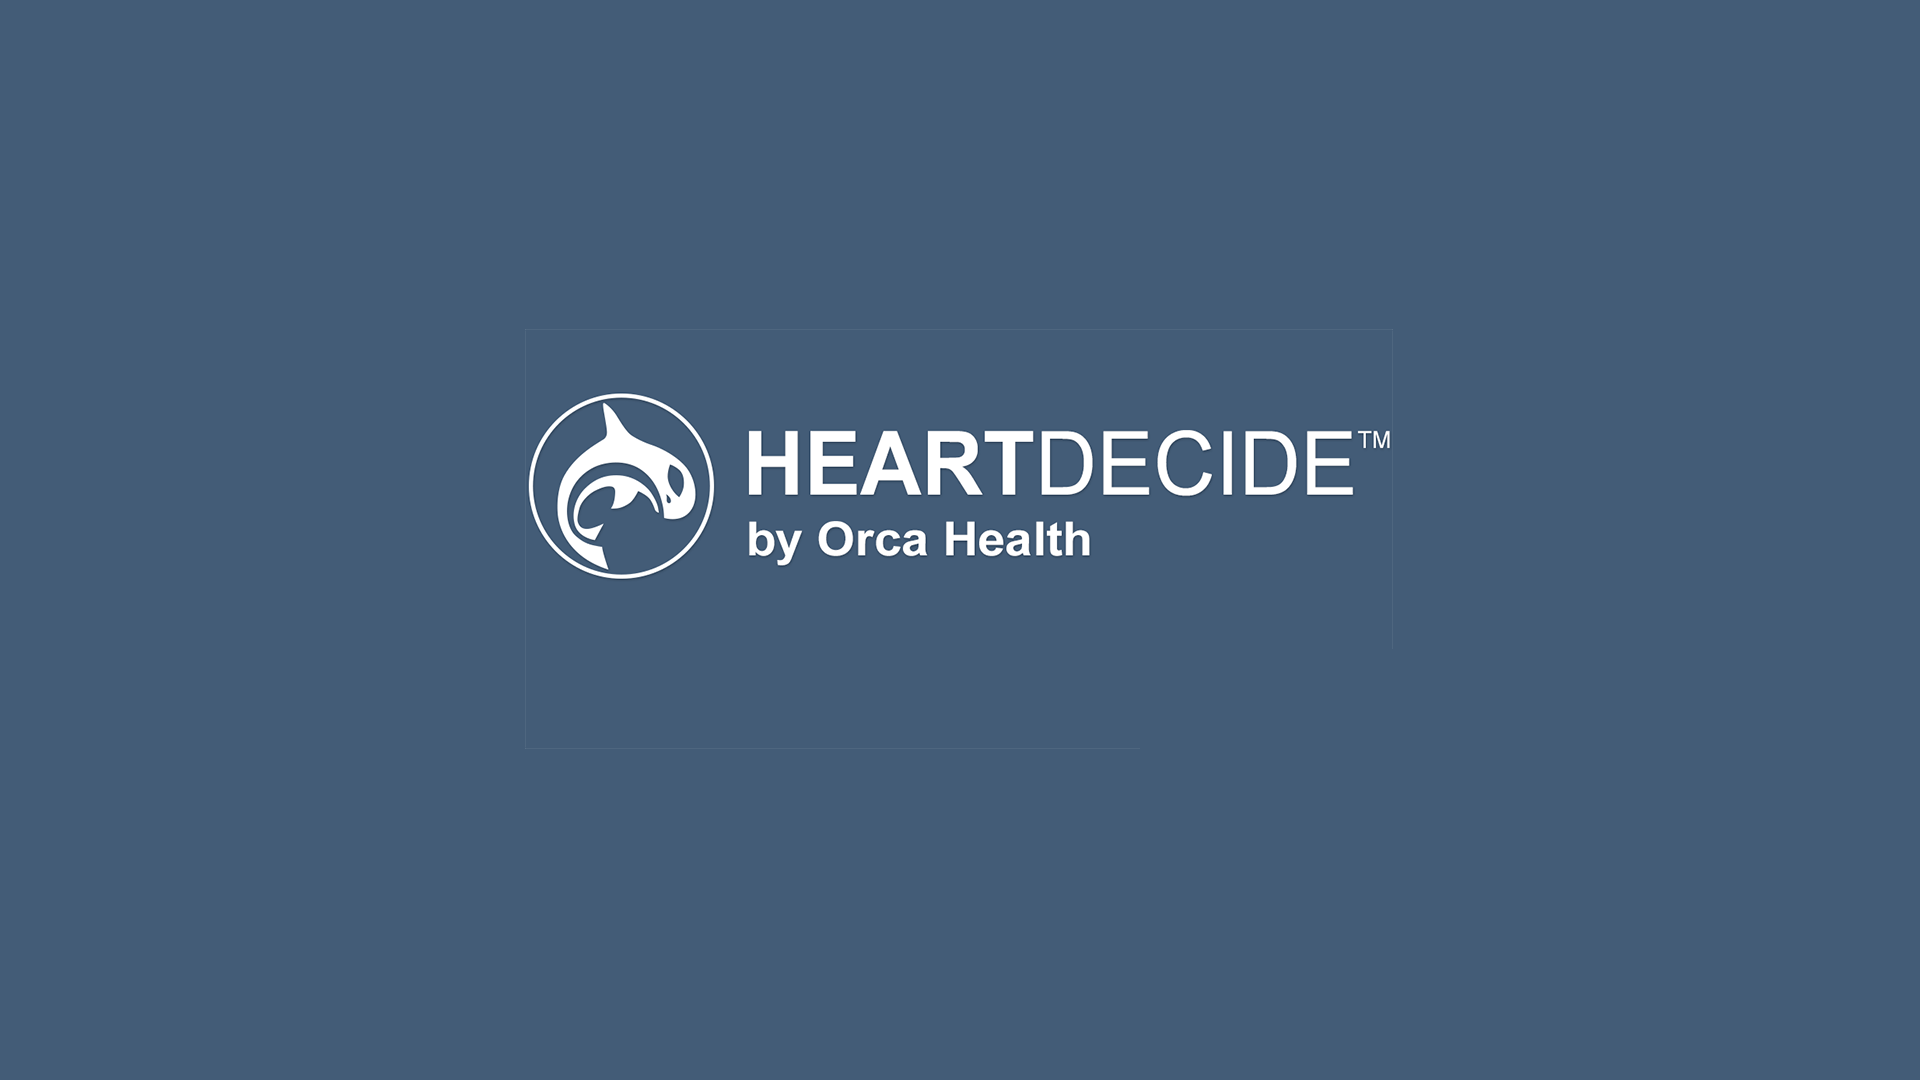 Heart Decide by Orca Health